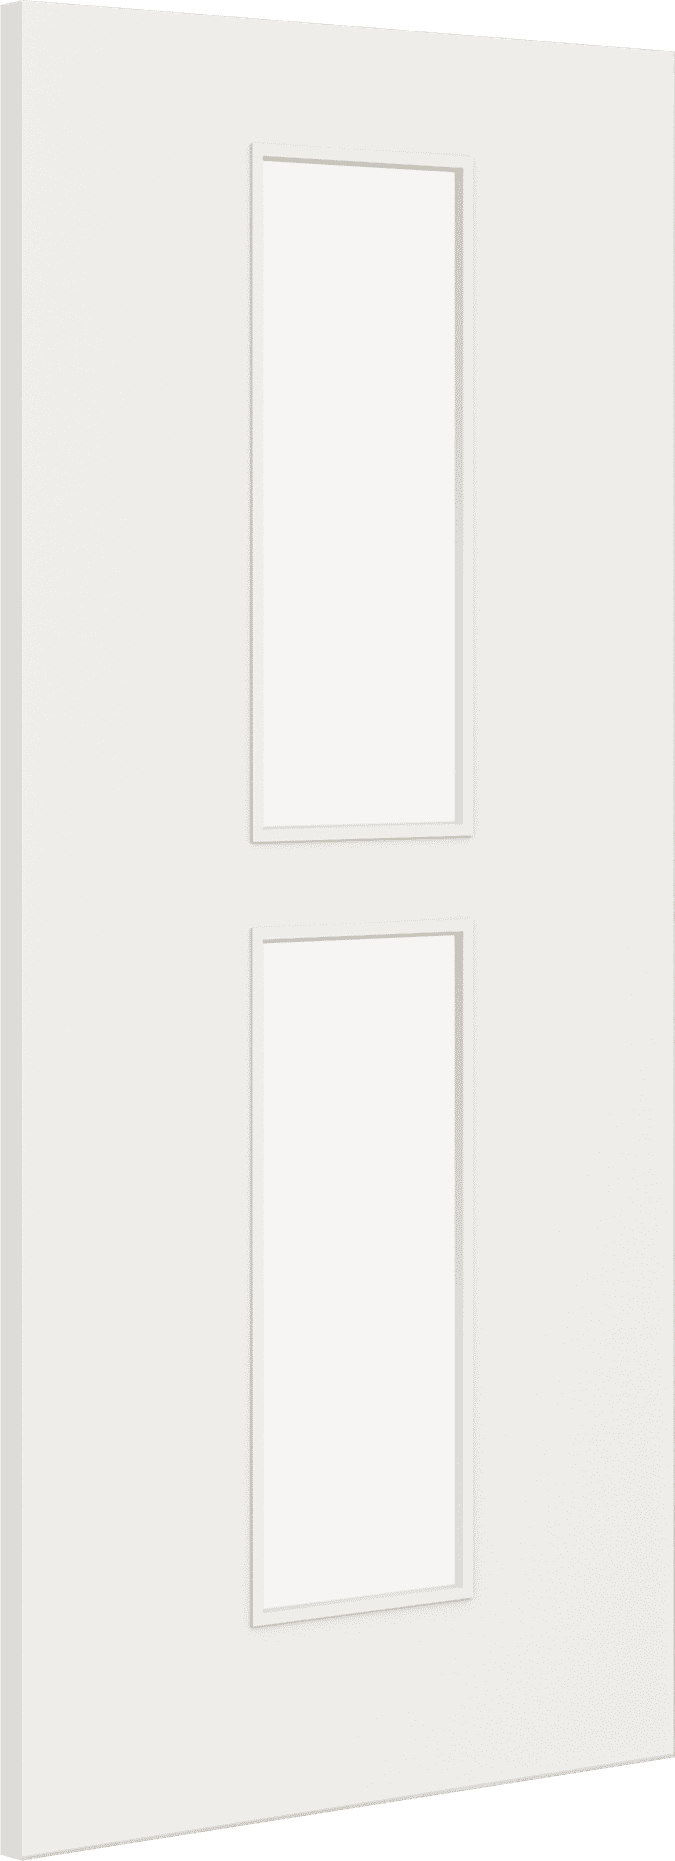 2040mm x 626mm x 44mm Architectural Paint Grade White 12 Clear Glazed Fire Door Blank